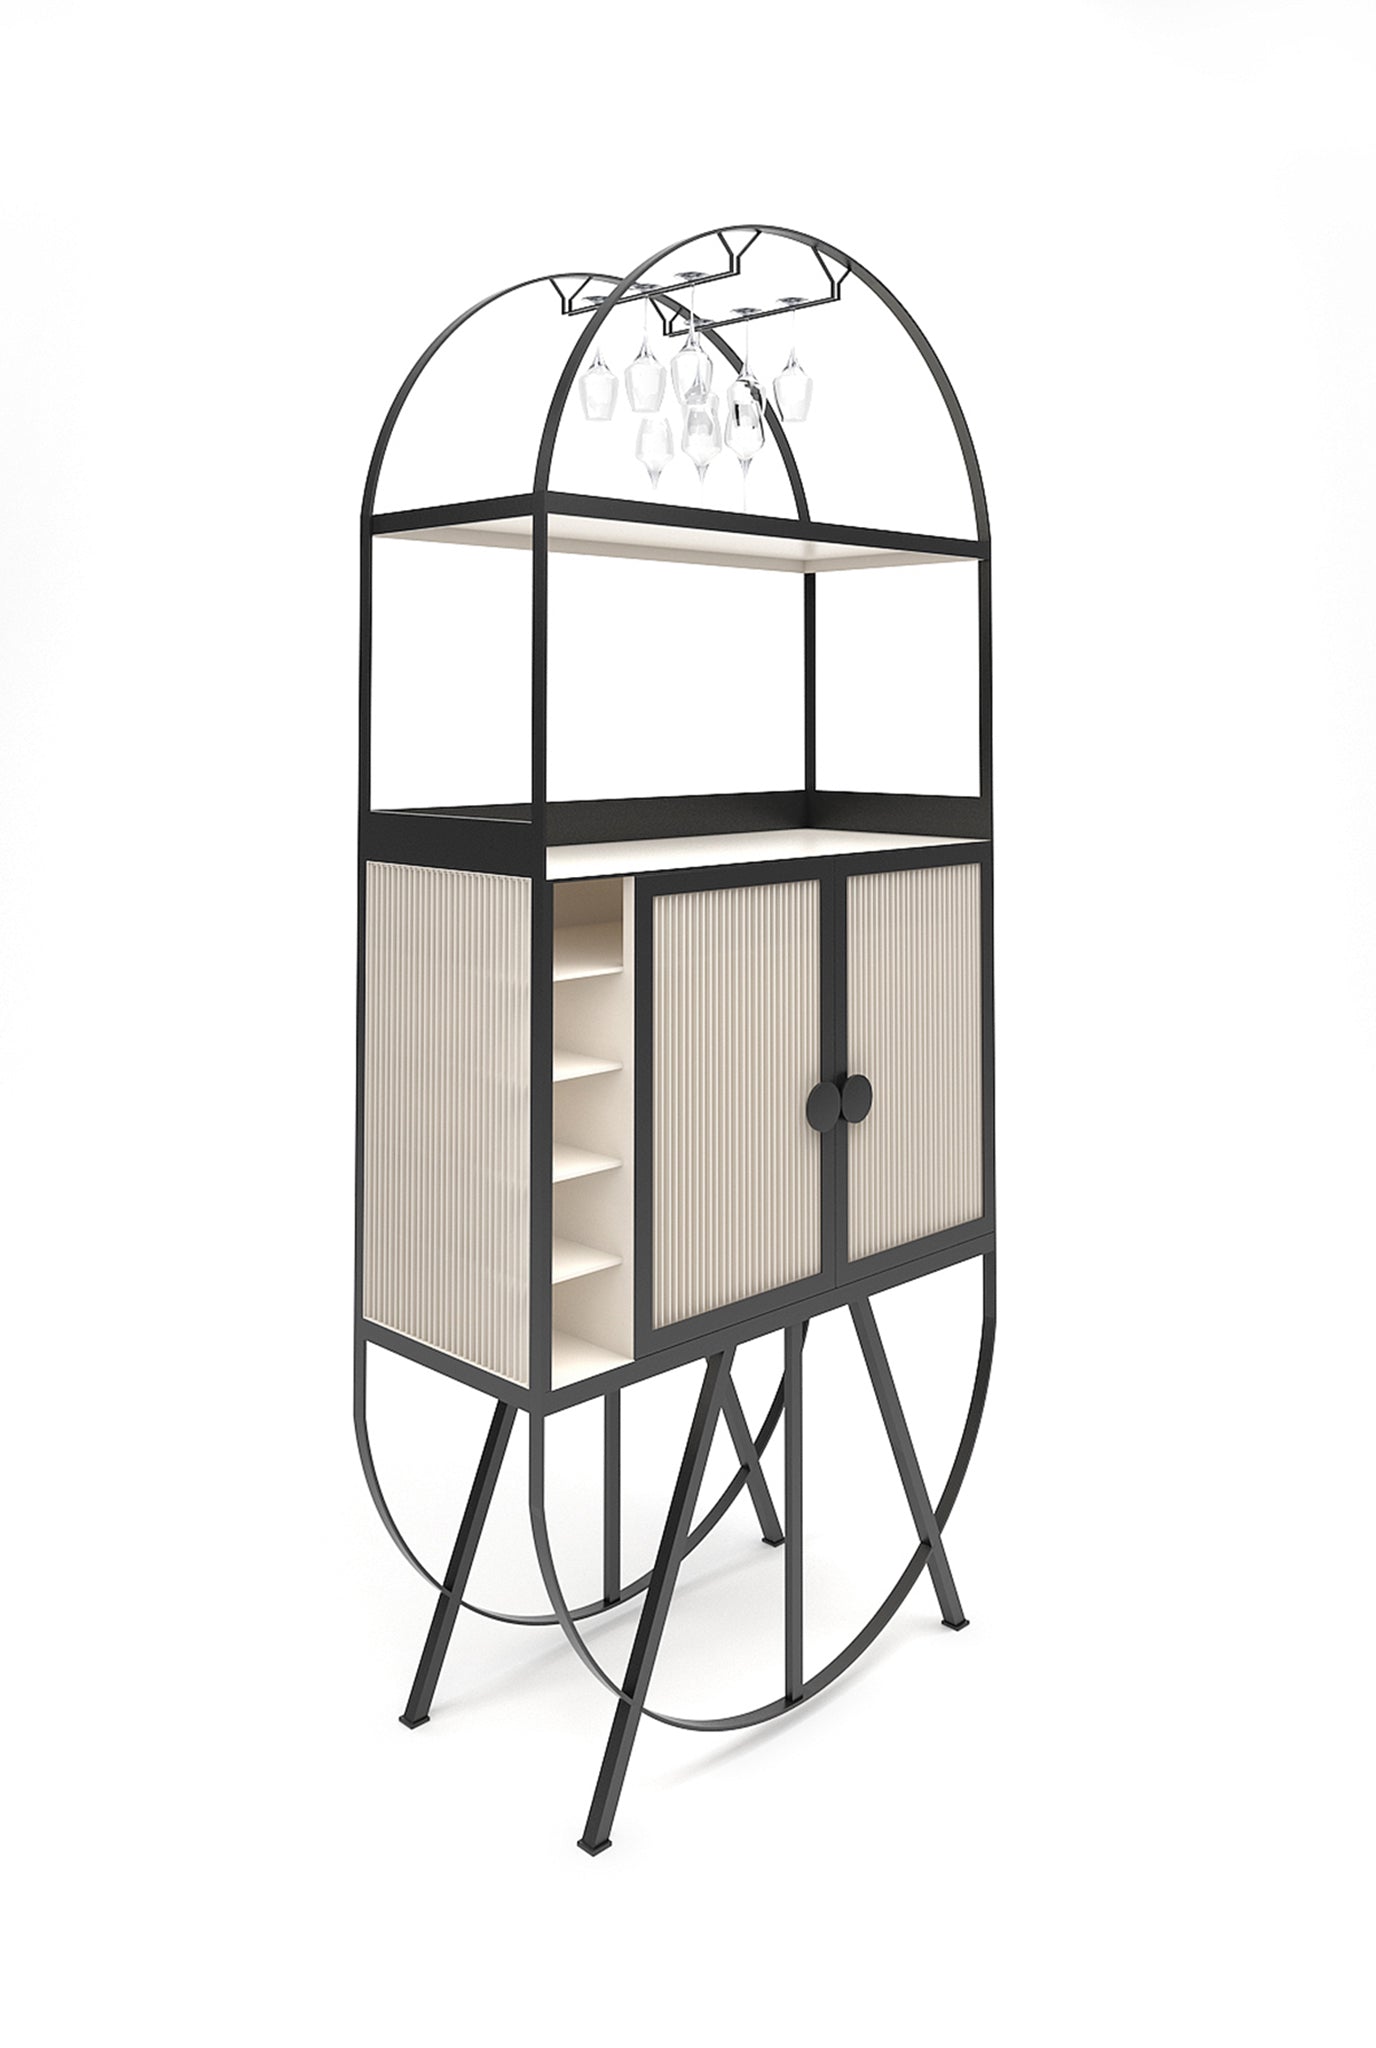 handcrafted-minibar-eclectic-metal frame-sustainable-jodi